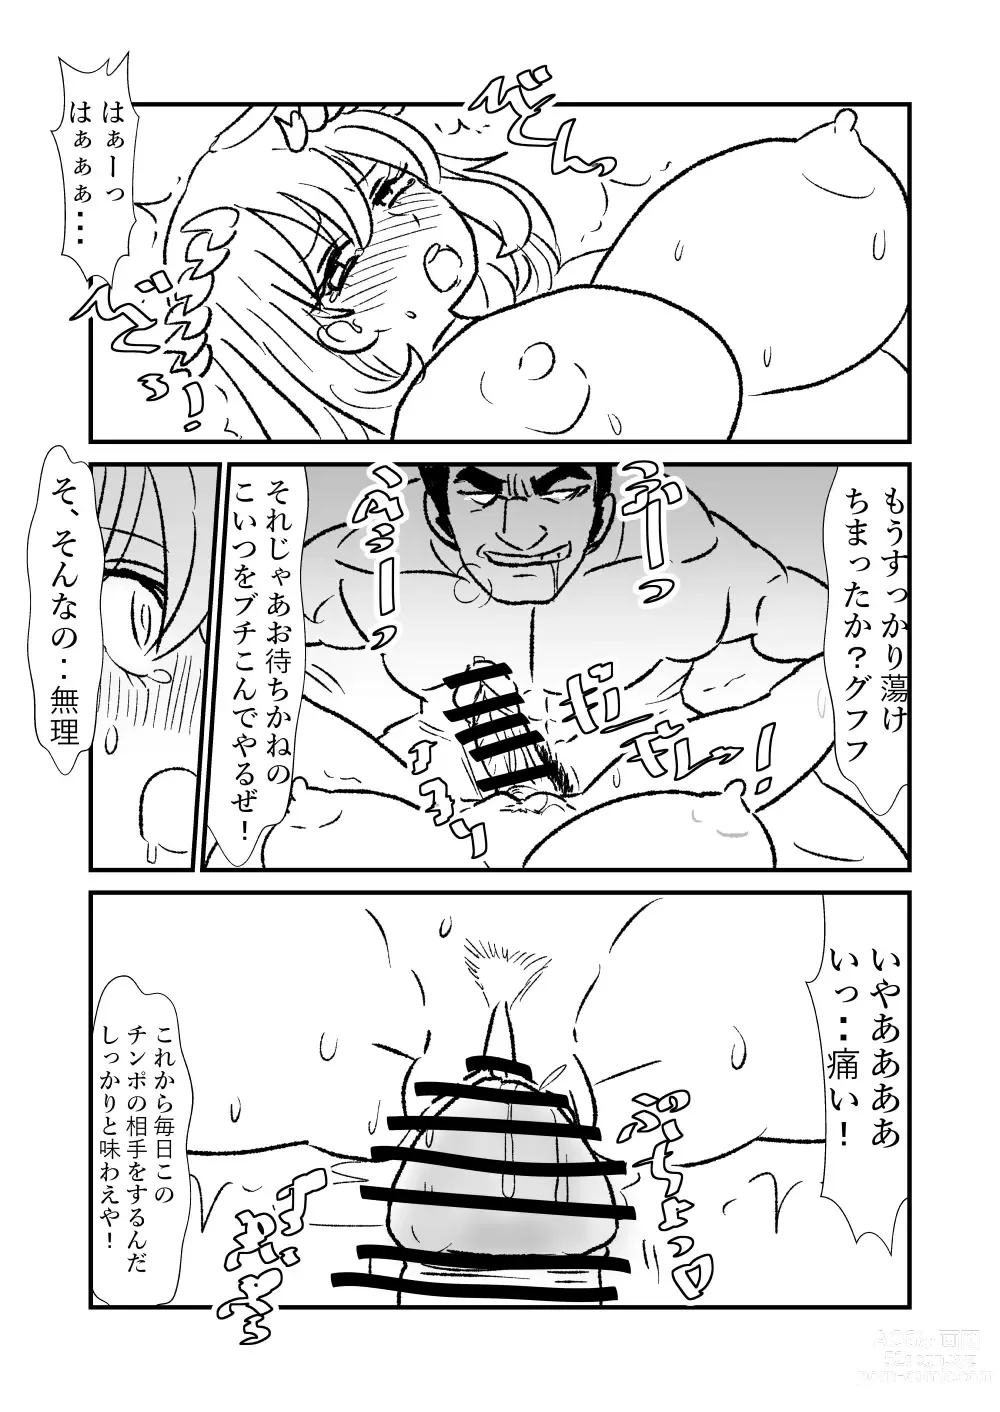 Page 15 of doujinshi Hime Kendo Cage